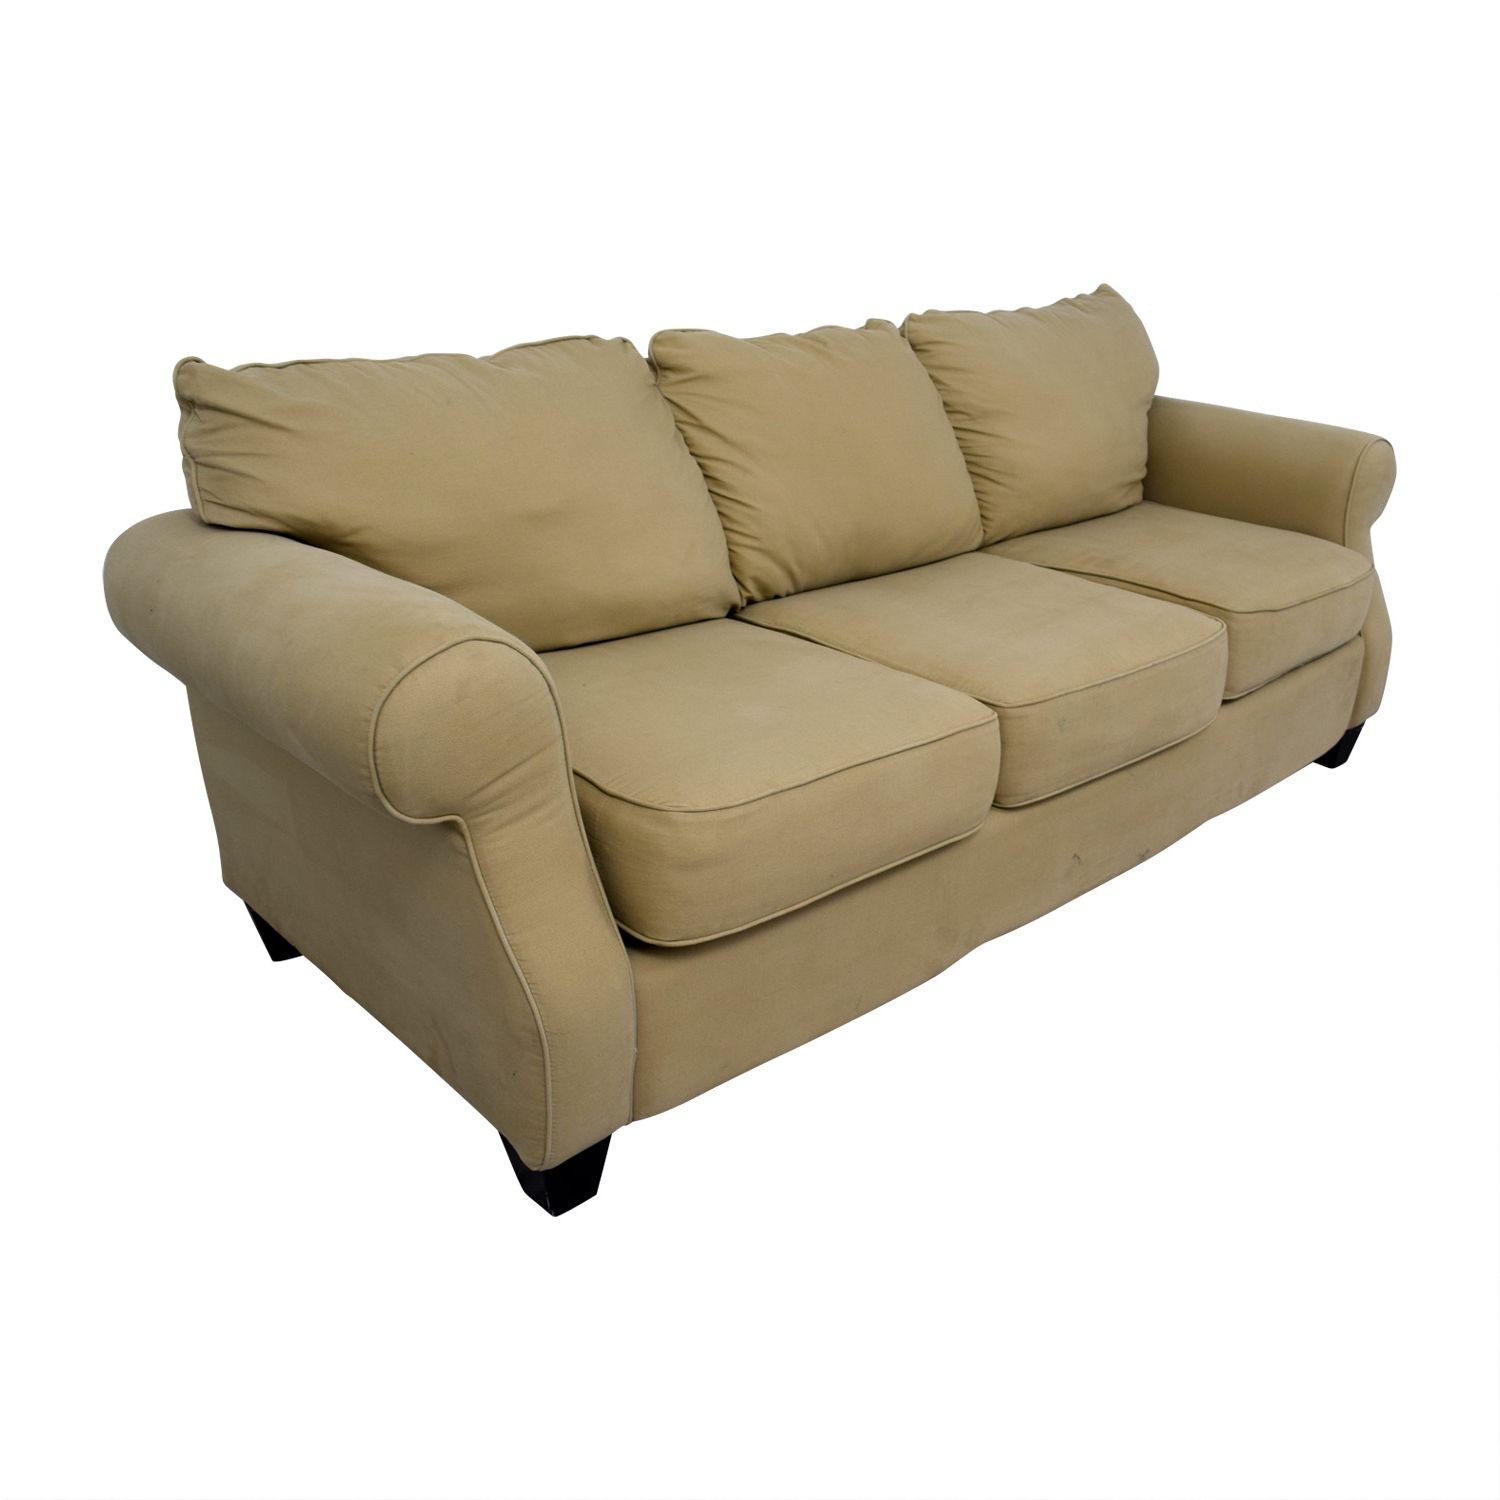 [%90% Off – Beige Three Cushion Curved Arm Sofa / Sofas In Most Popular Sofas With Curved Arms|sofas With Curved Arms Throughout Fashionable 90% Off – Beige Three Cushion Curved Arm Sofa / Sofas|favorite Sofas With Curved Arms Regarding 90% Off – Beige Three Cushion Curved Arm Sofa / Sofas|most Current 90% Off – Beige Three Cushion Curved Arm Sofa / Sofas For Sofas With Curved Arms%] (Photo 9 of 15)